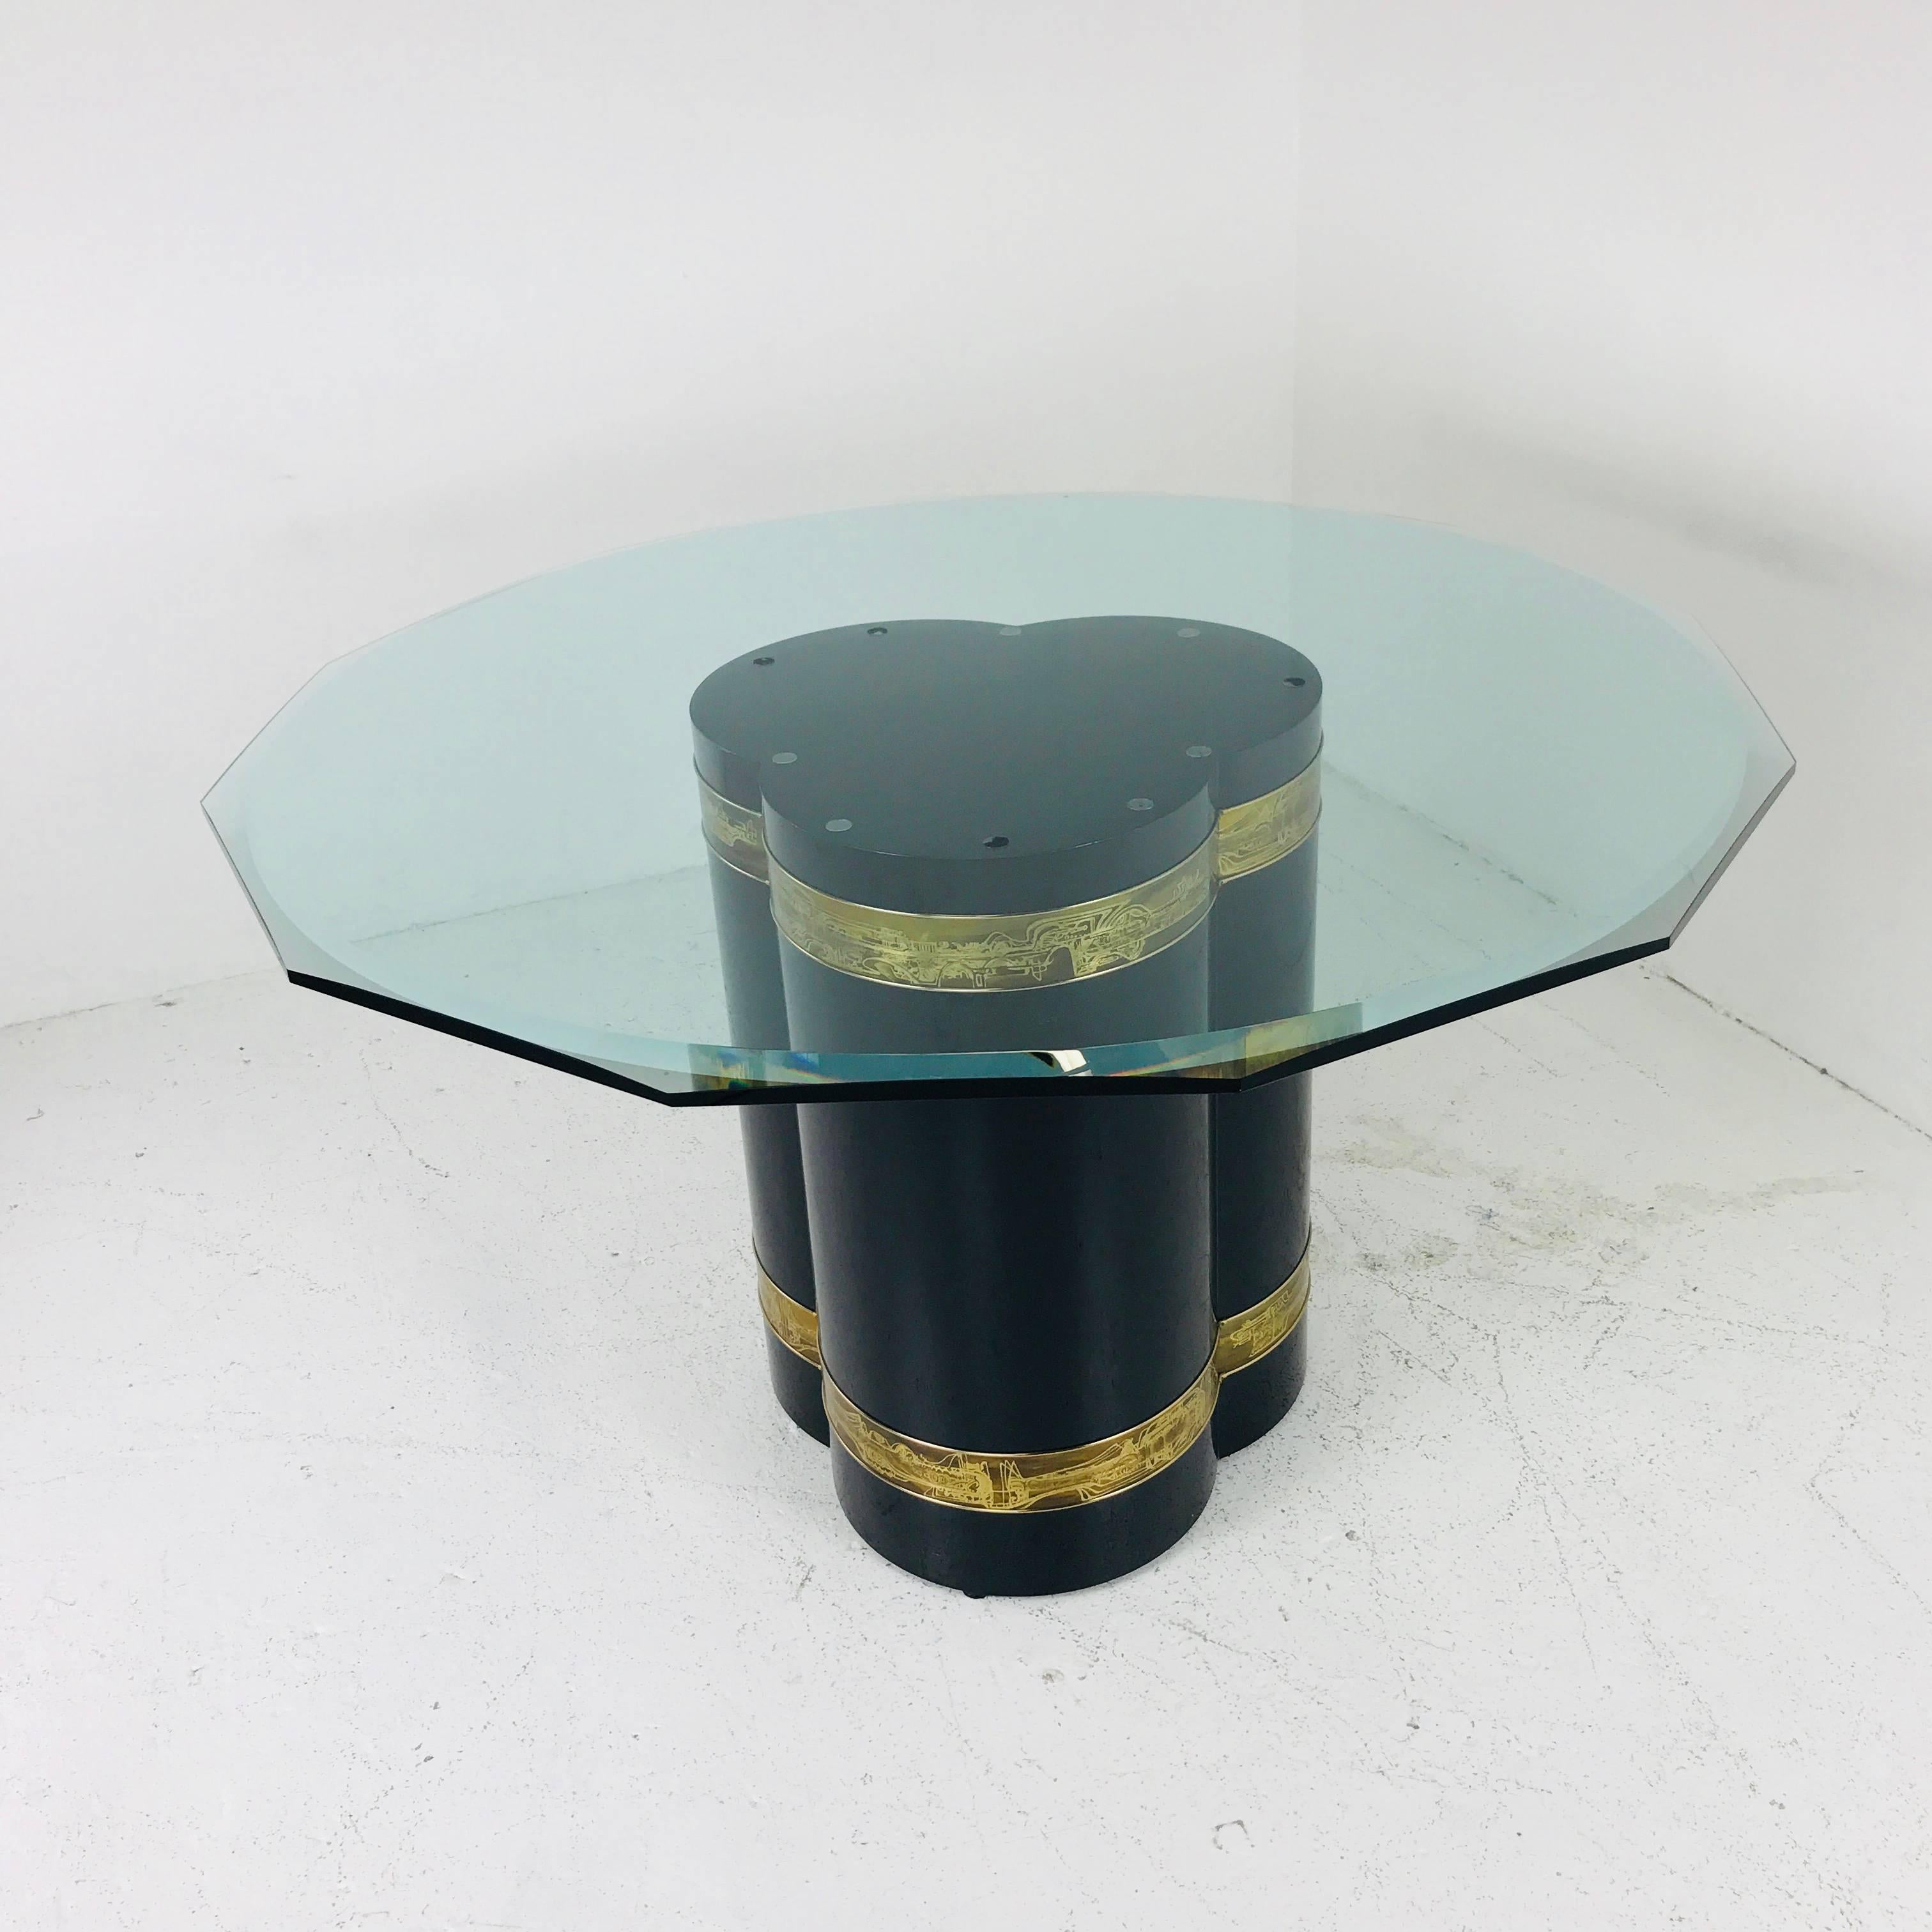 Mastercraft pedestal dining table. In good vintage condition with some chips in the glass table top.

Dimensions: 48